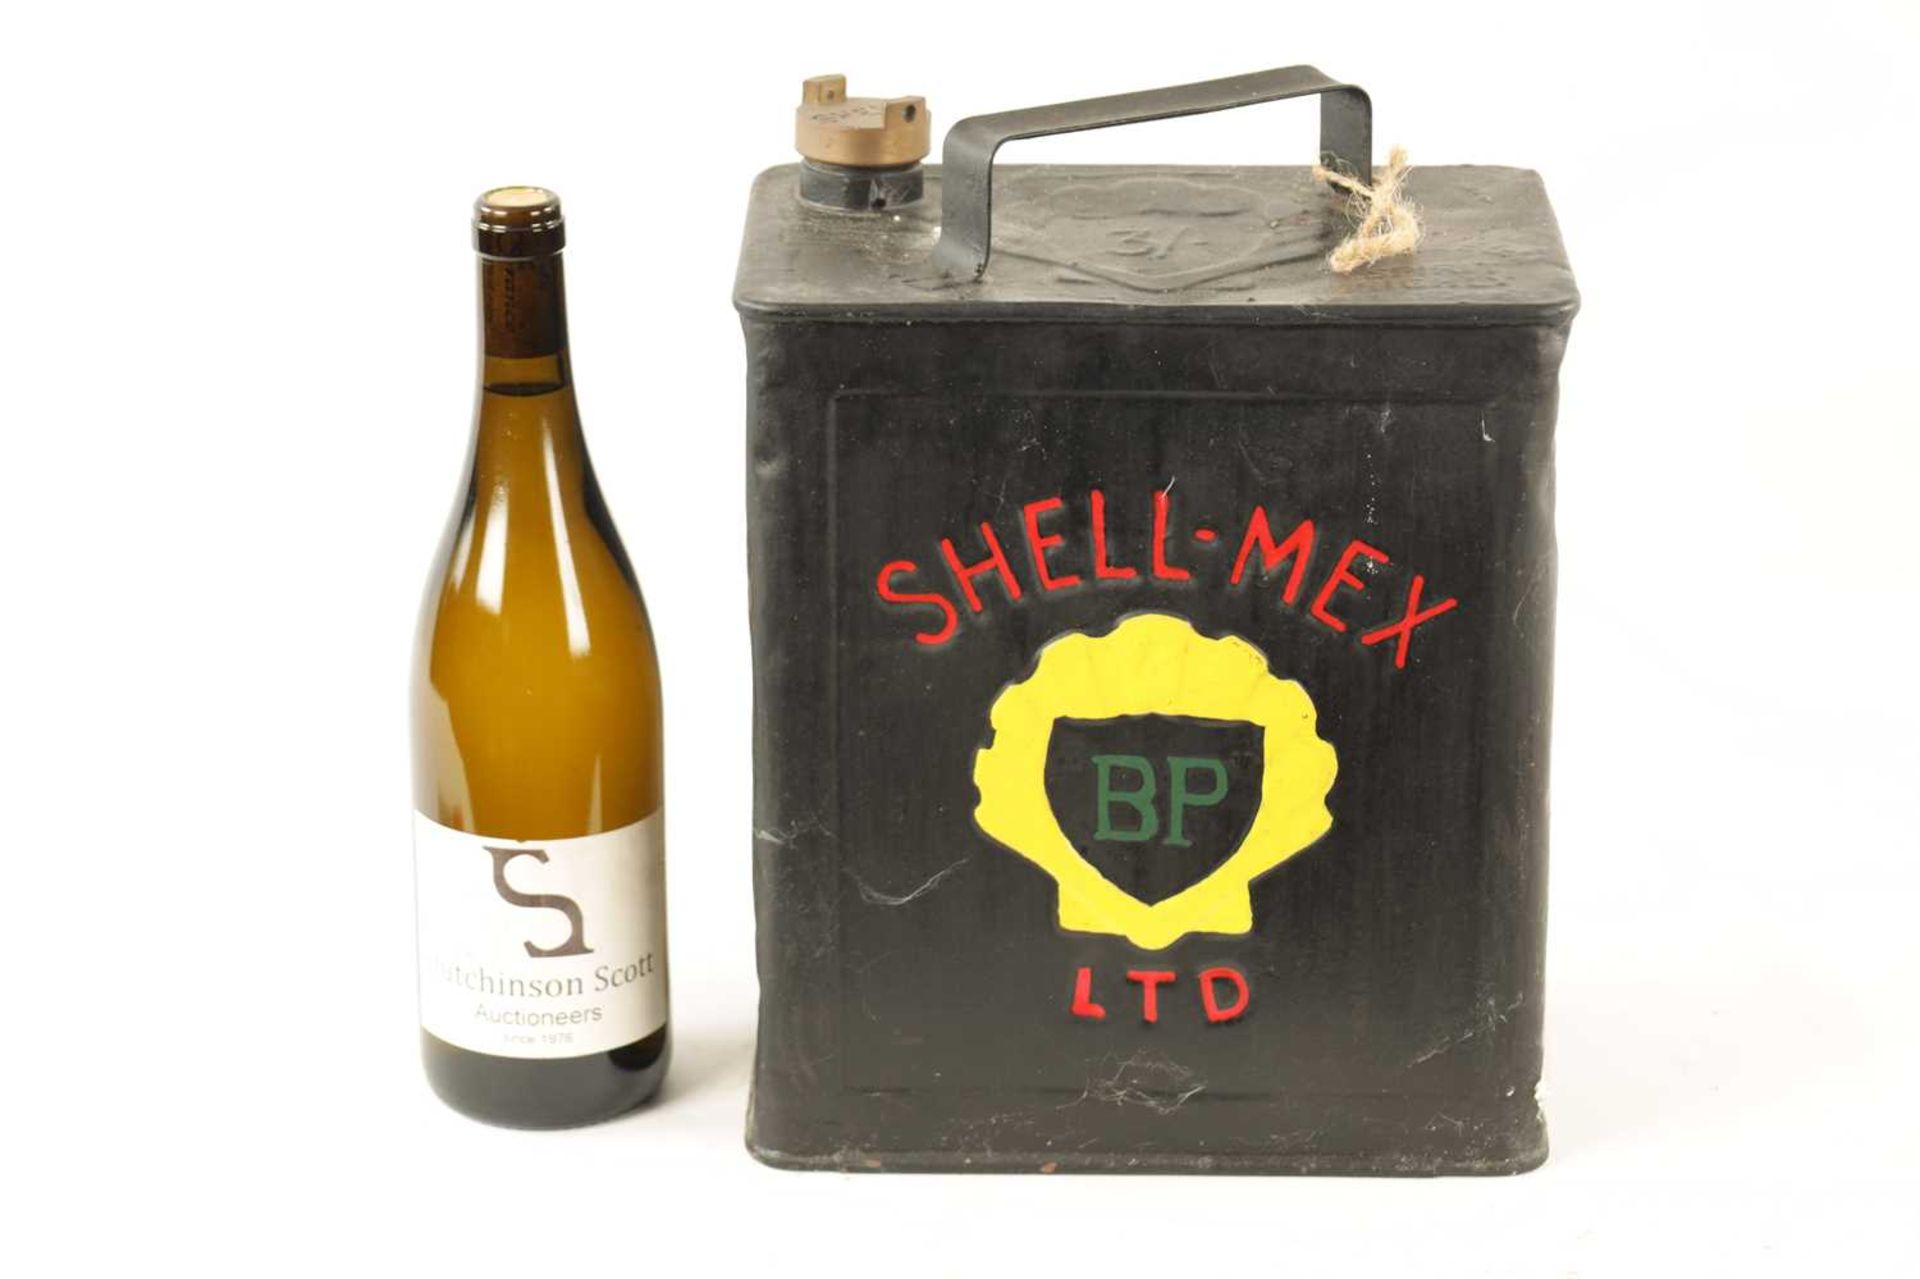 A VINTAGE 'SHELL BP' PETROL CAN - Image 2 of 4